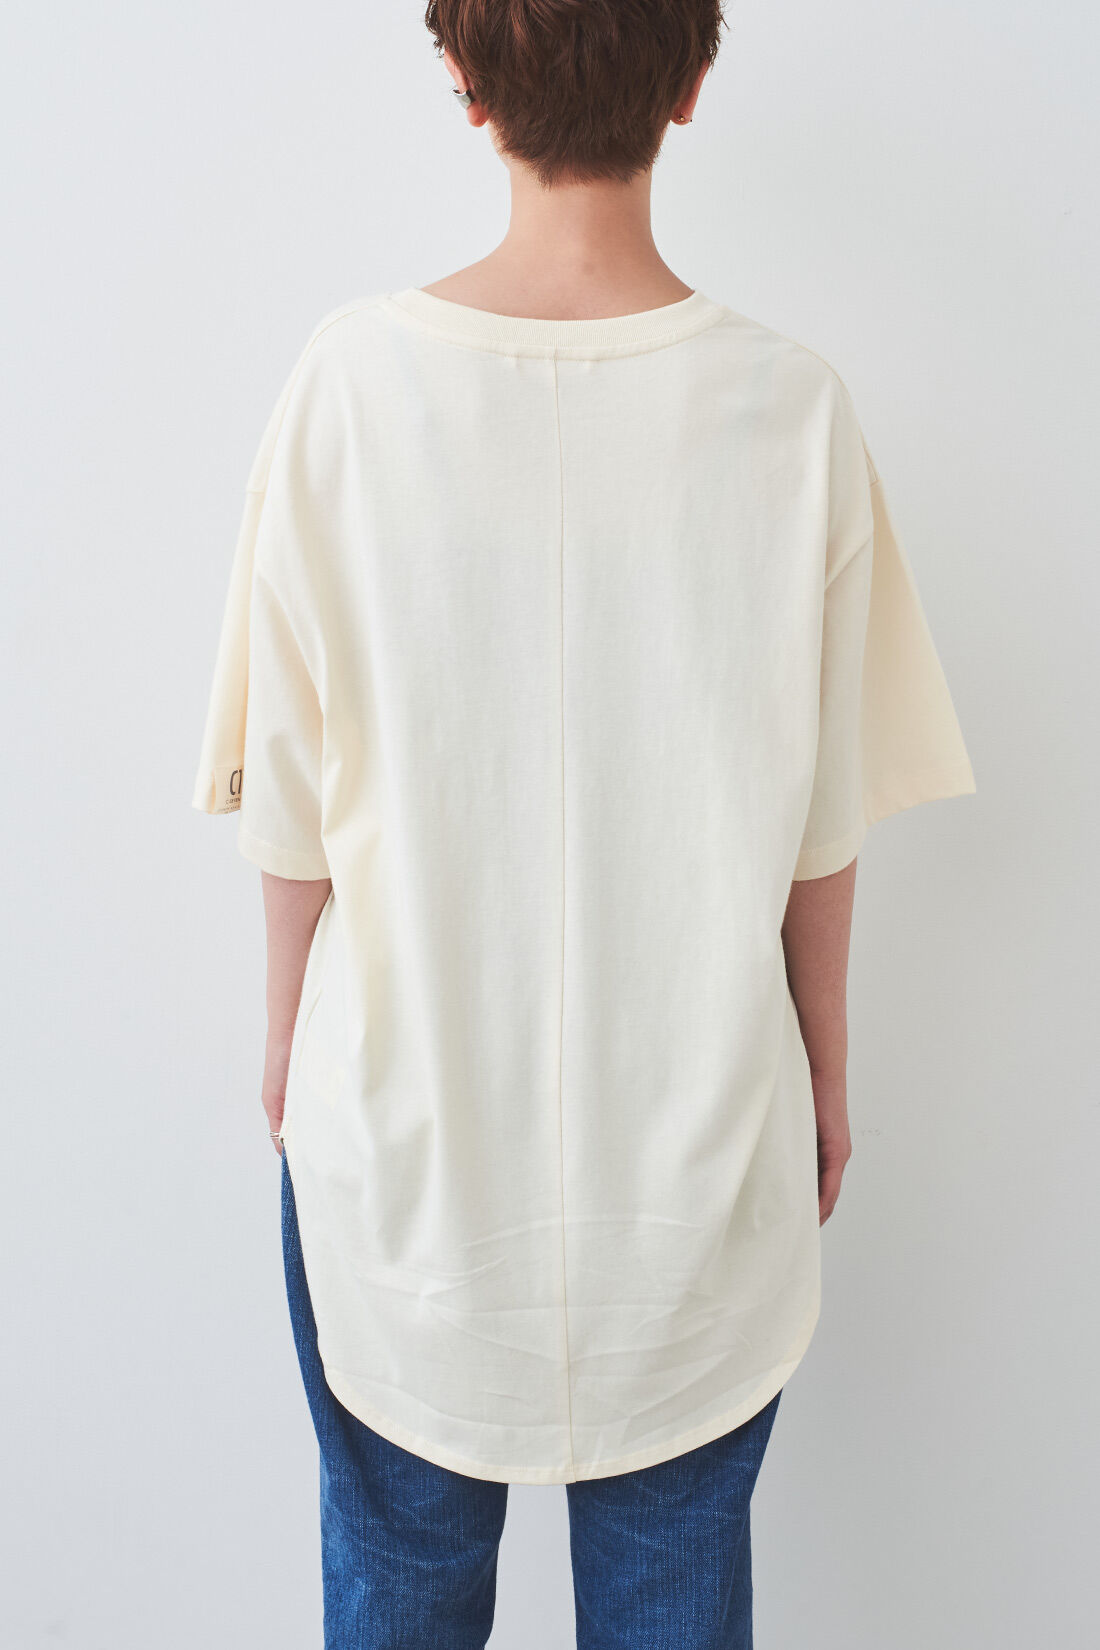 Real Stock|MEDE19F 〈SELECT〉 C17 スリットビッグTシャツ